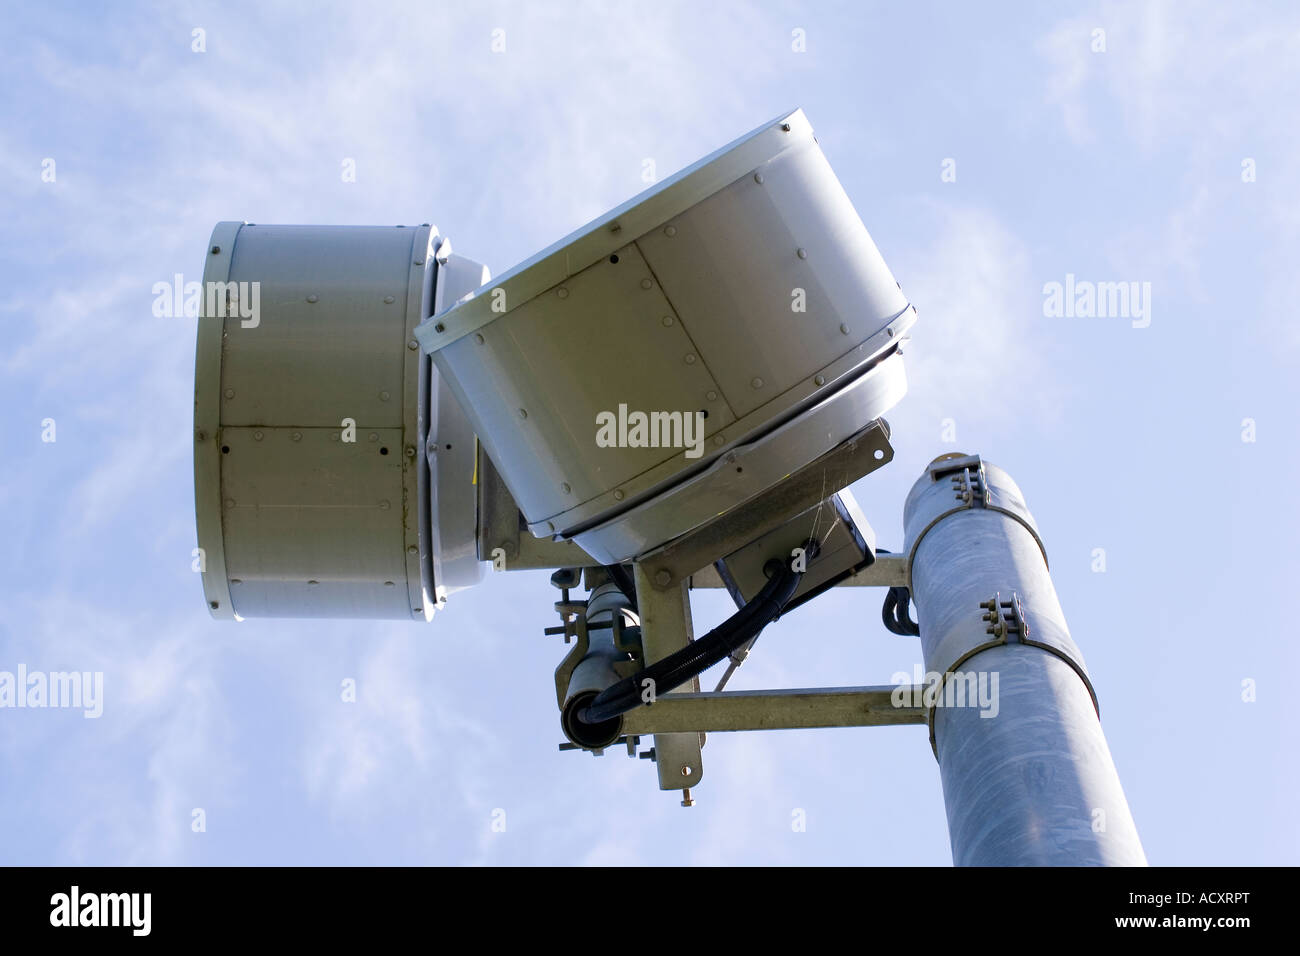 Closeup Of Microwave Dish On High Antenna Tower And Blue Sky